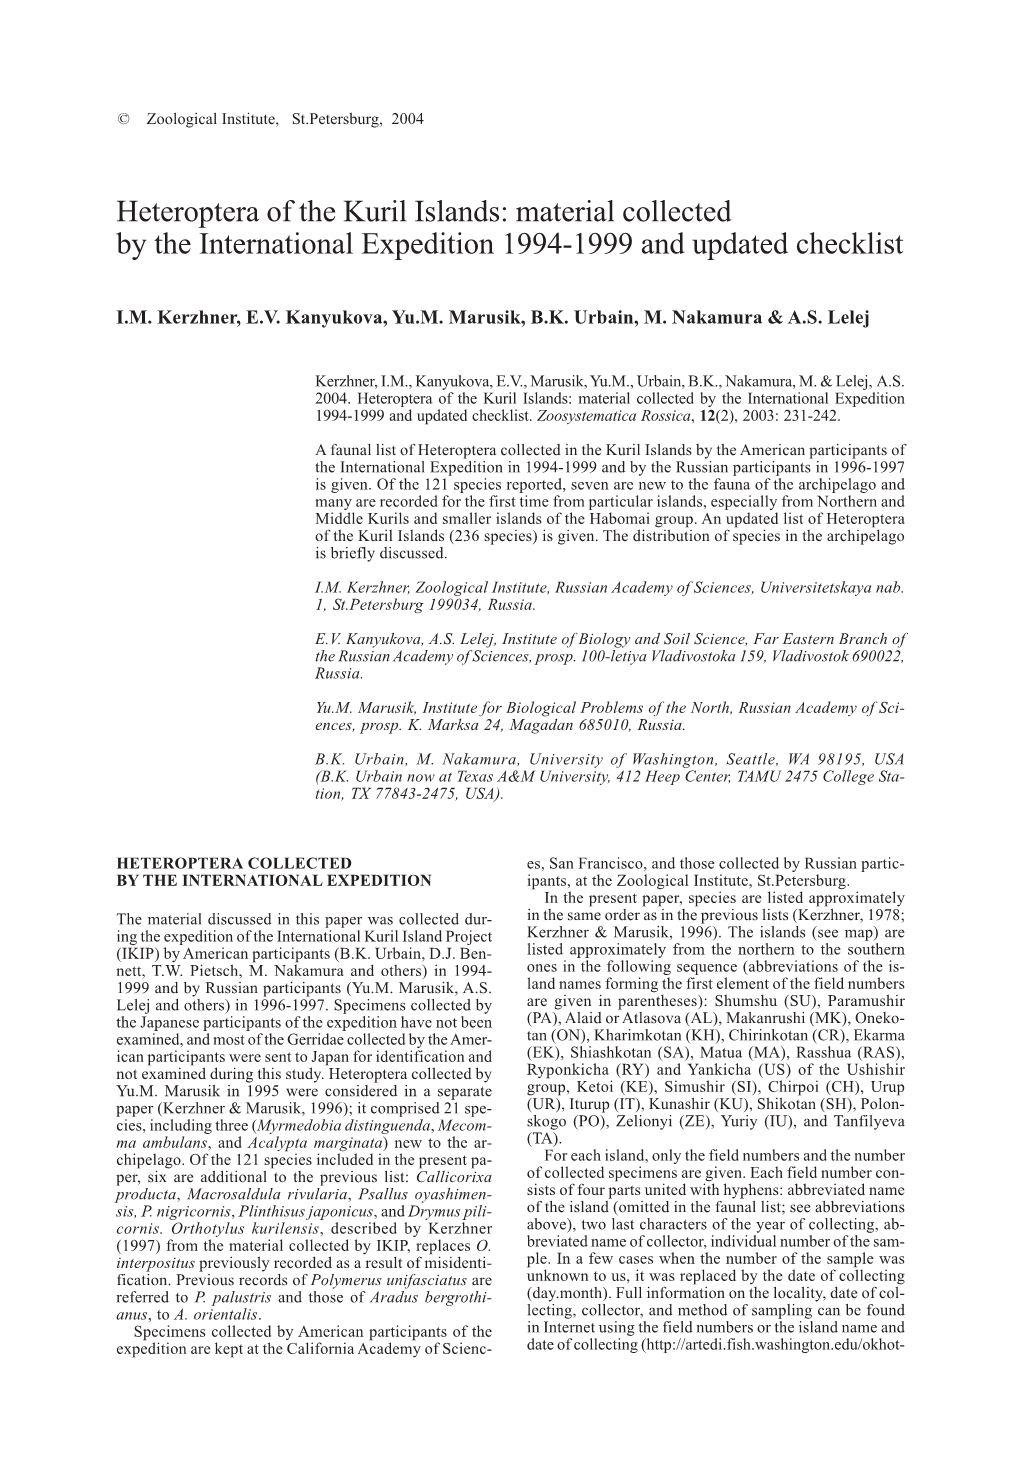 Heteroptera of the Kuril Islands: Material Collected by the International Expedition 1994-1999 and Updated Checklist